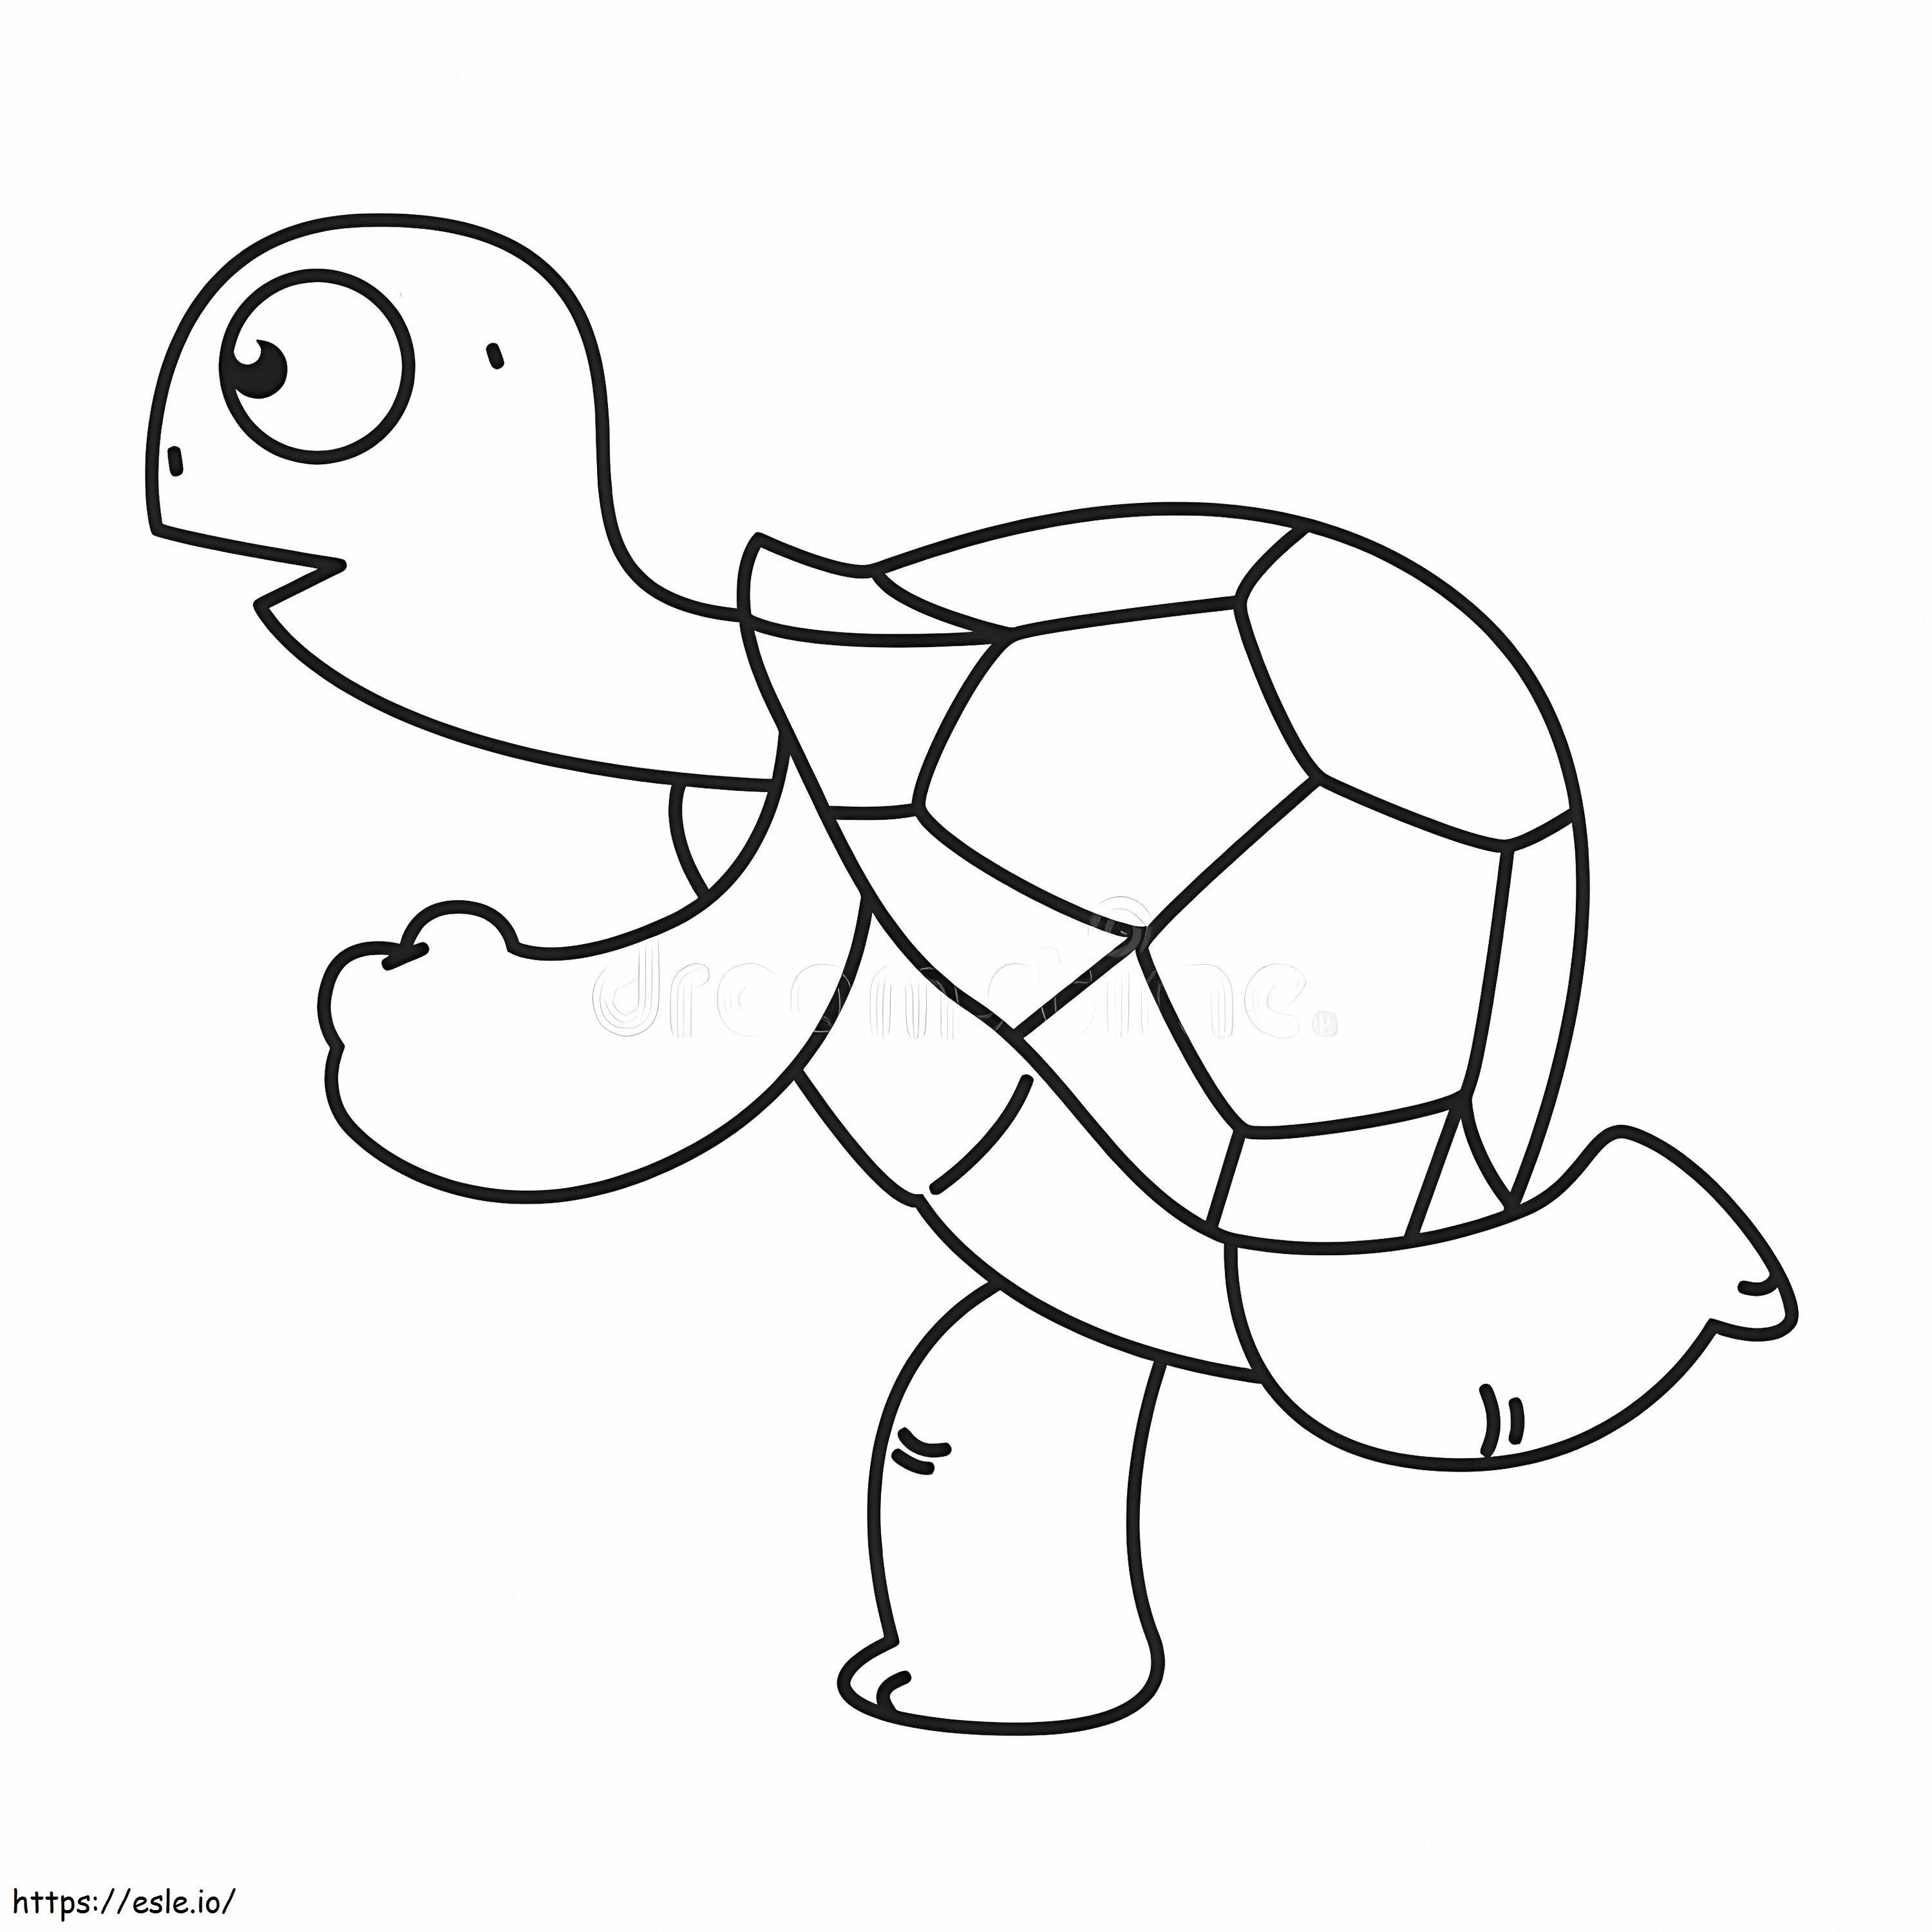 Running Turtle coloring page